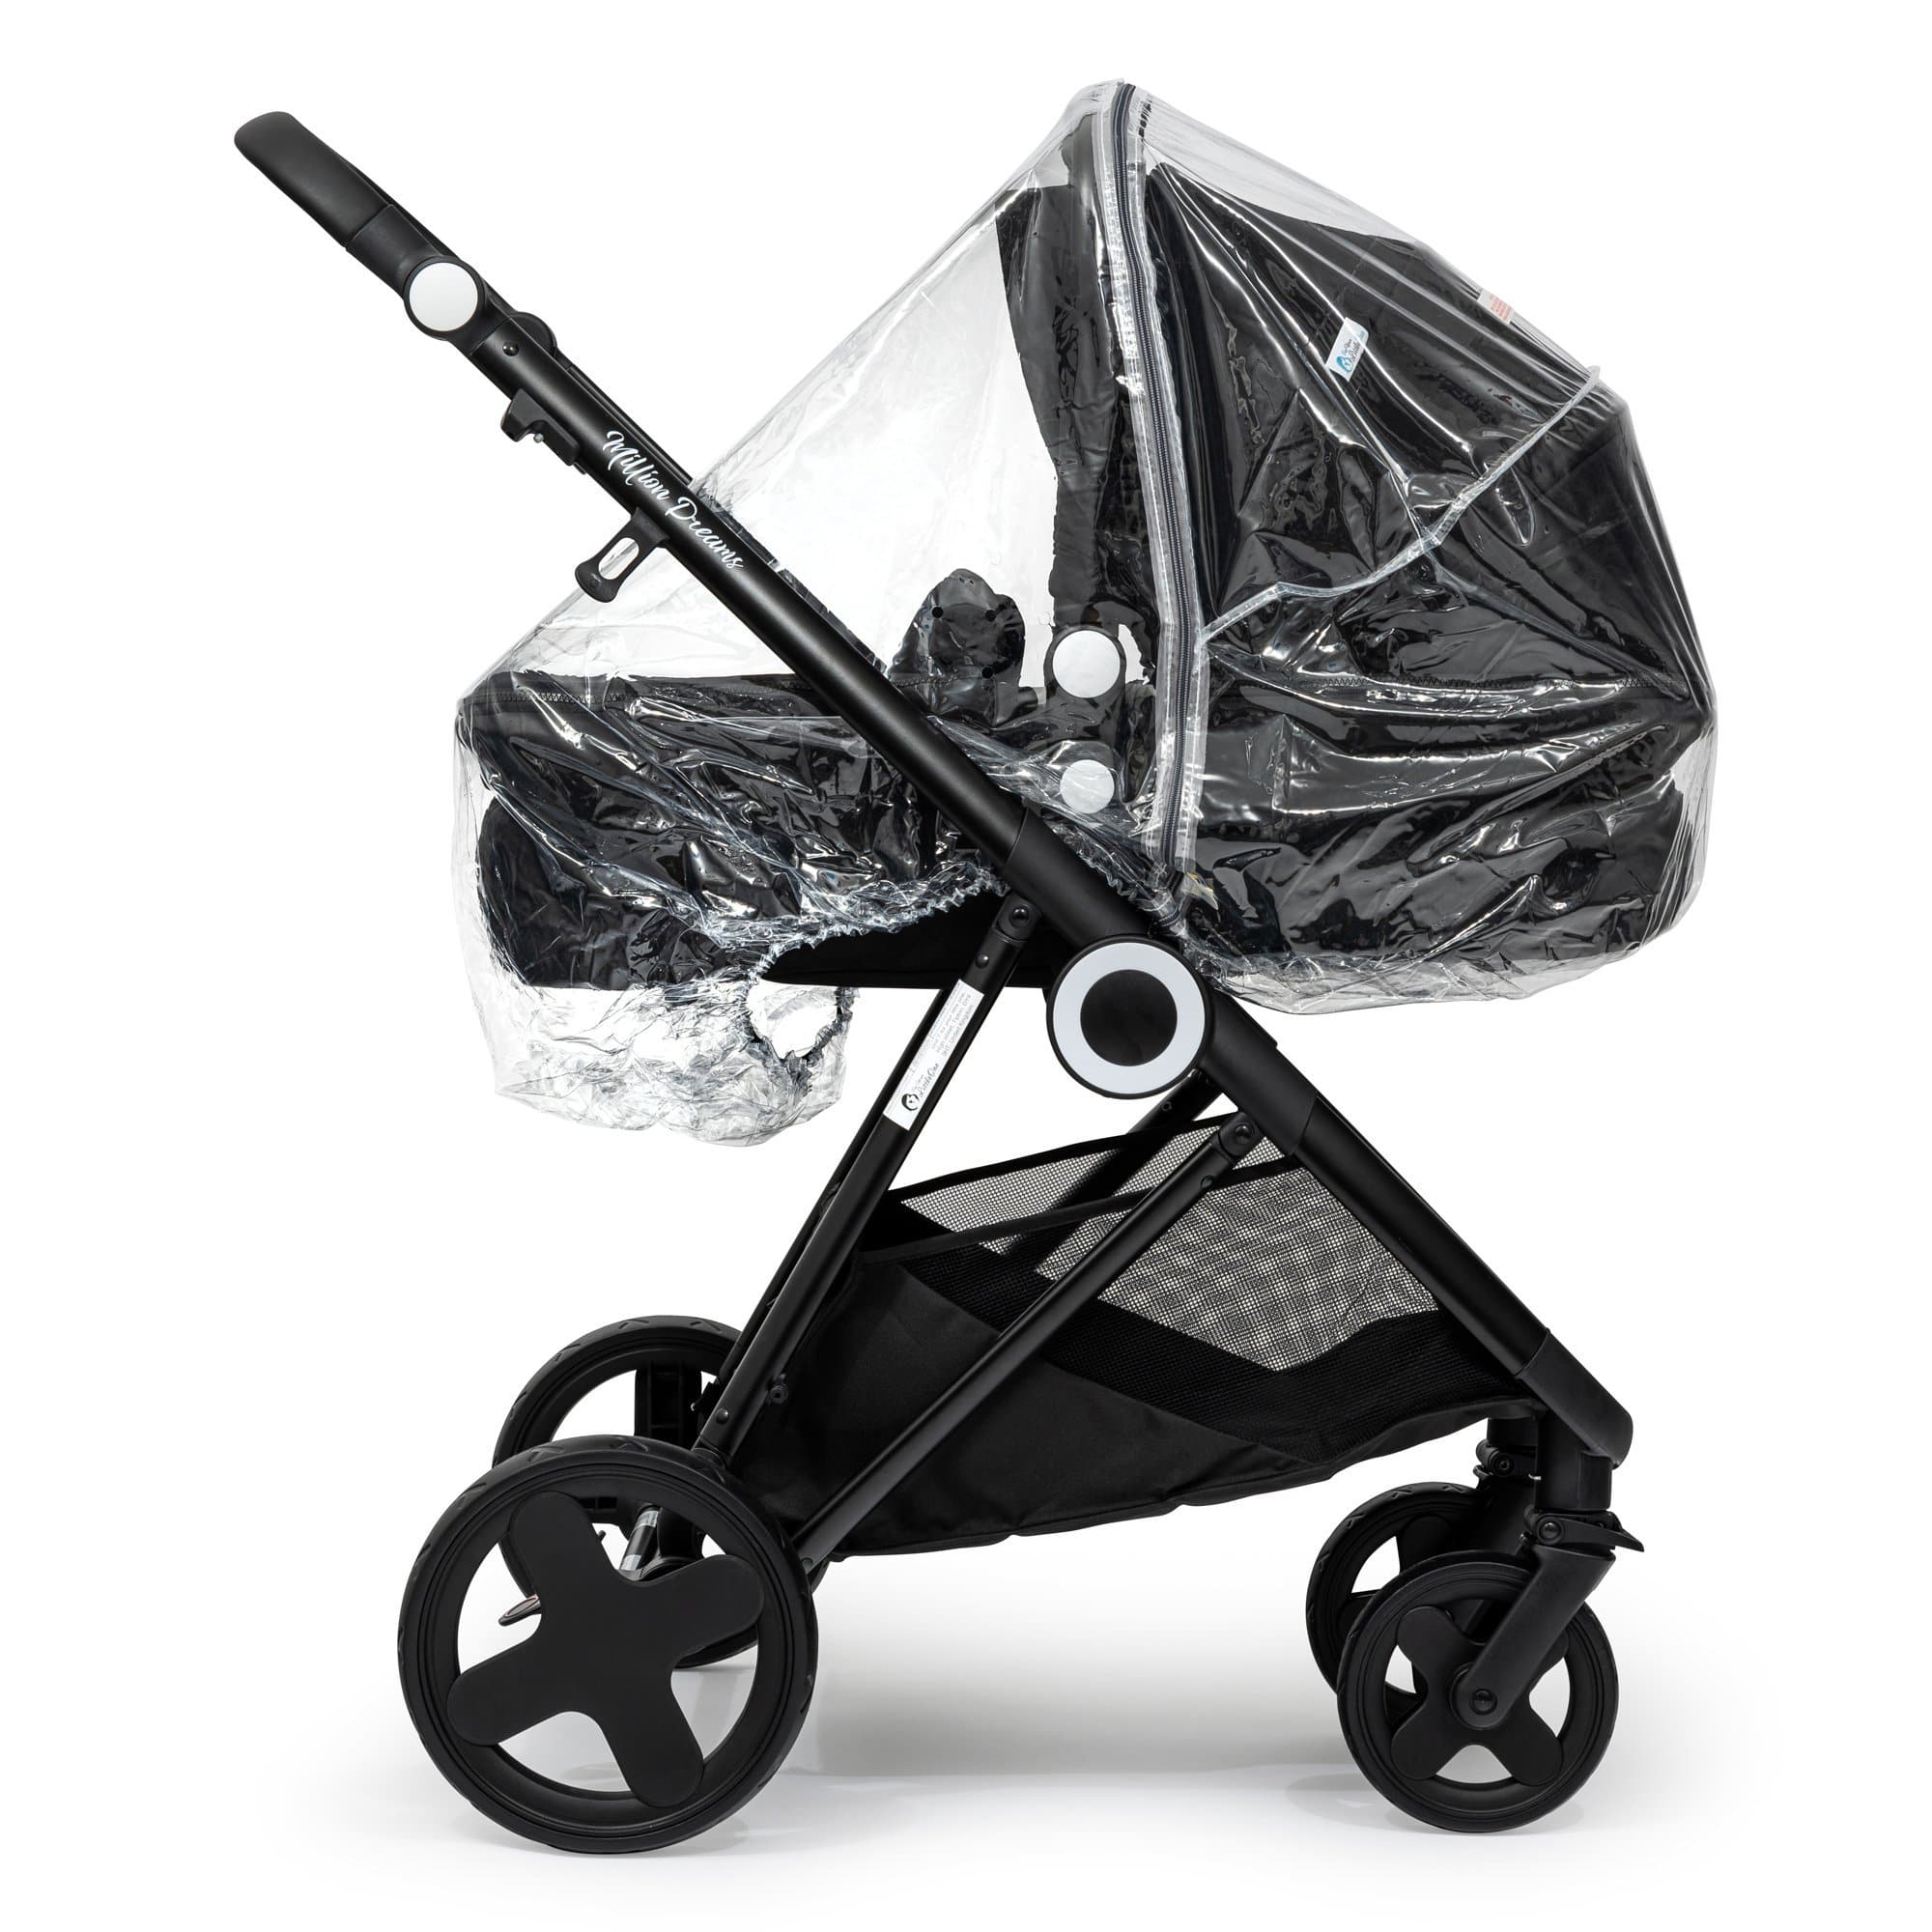 2 in 1 Rain Cover Compatible with Emmaljunga - Fits All Models -  | For Your Little One